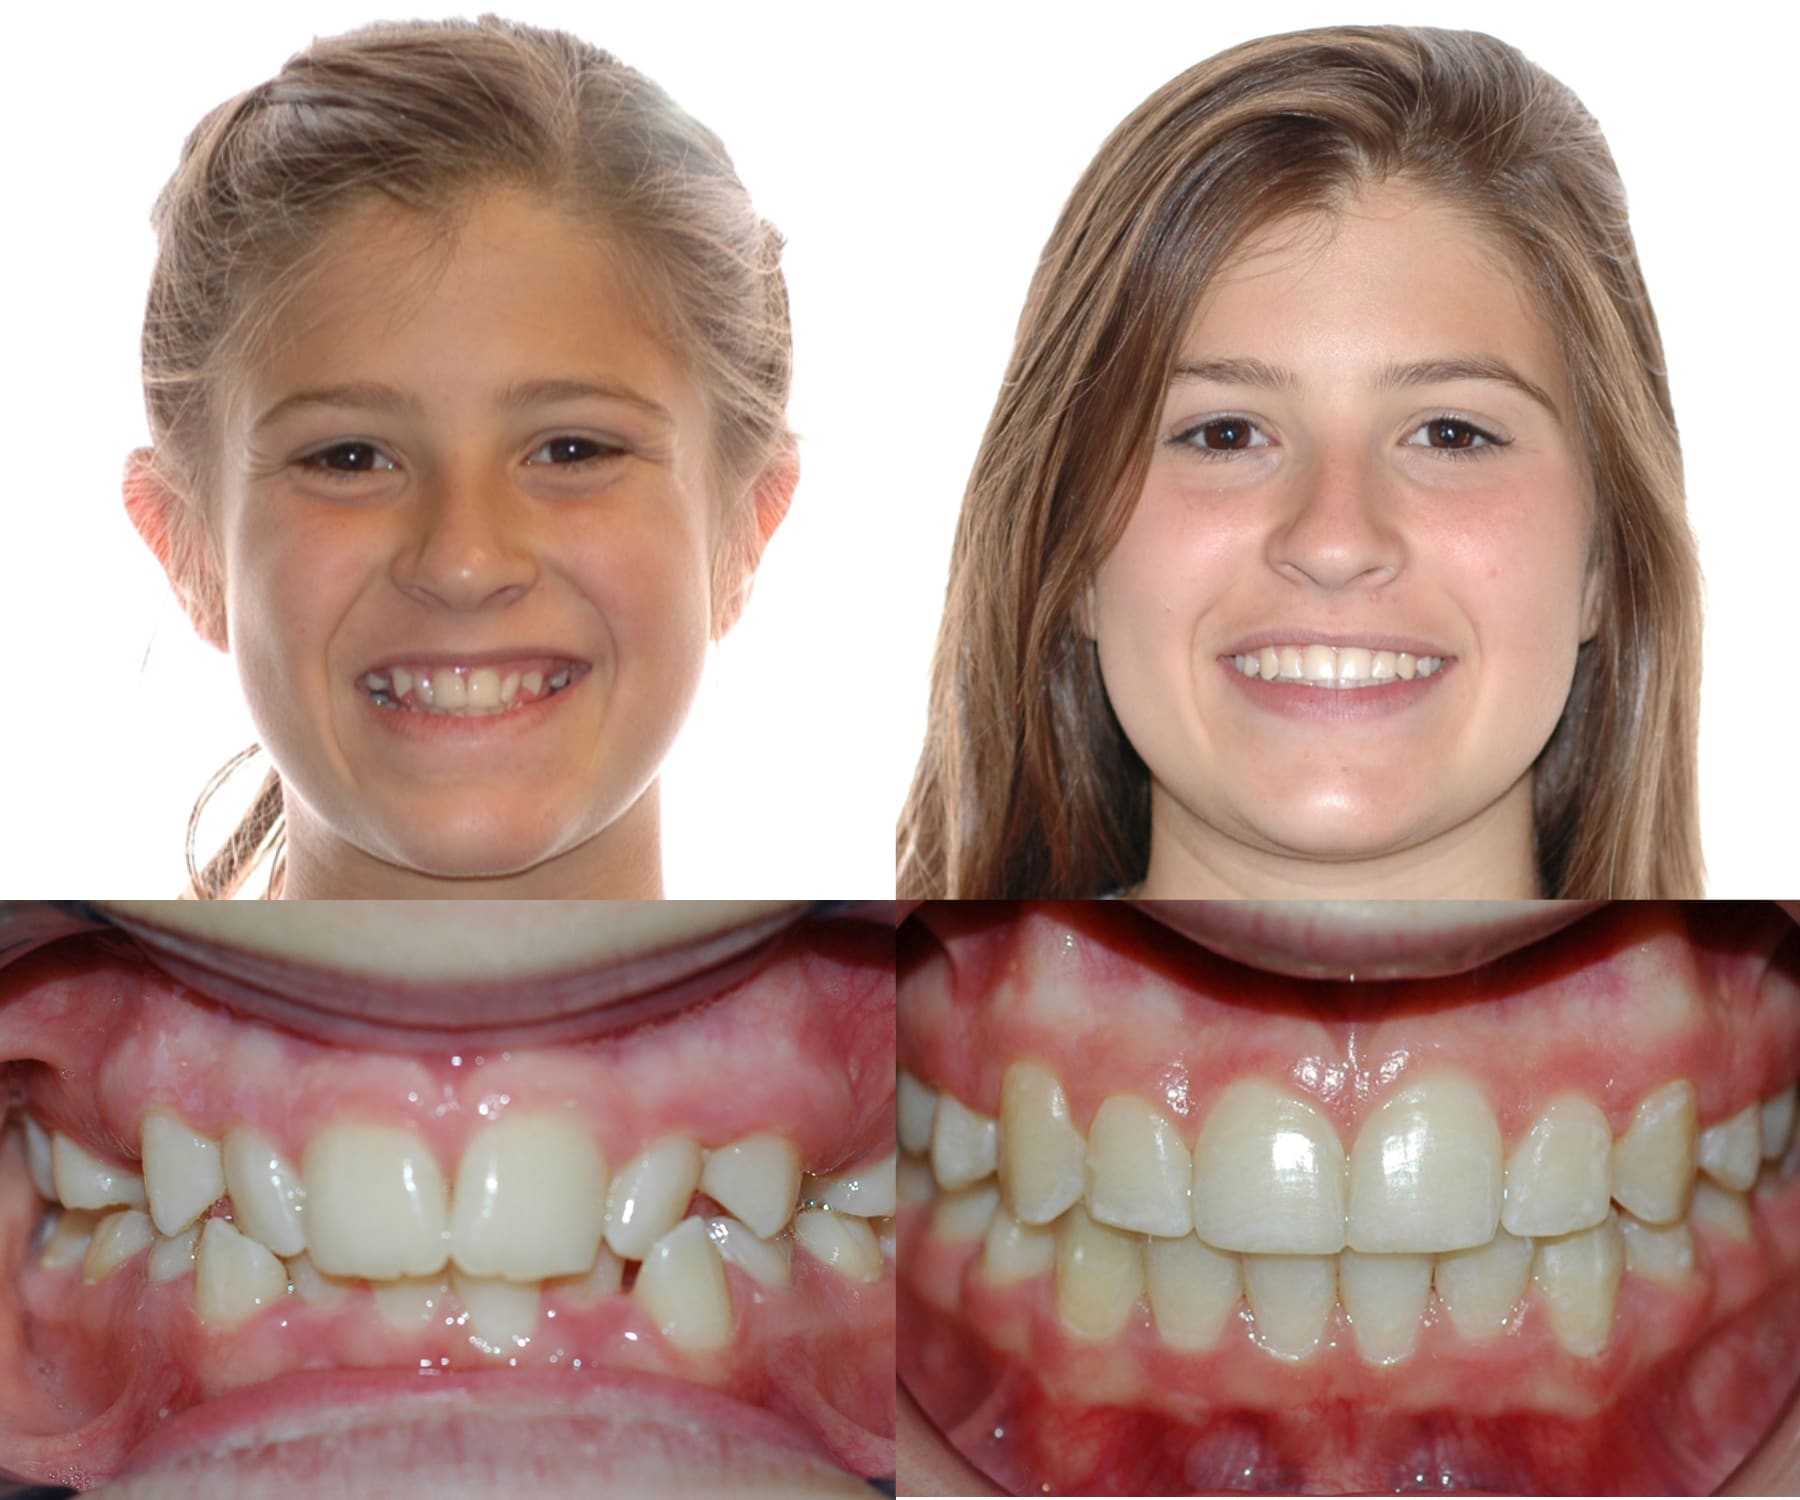 christine buist recommends Brooklyn And Bailey Braces